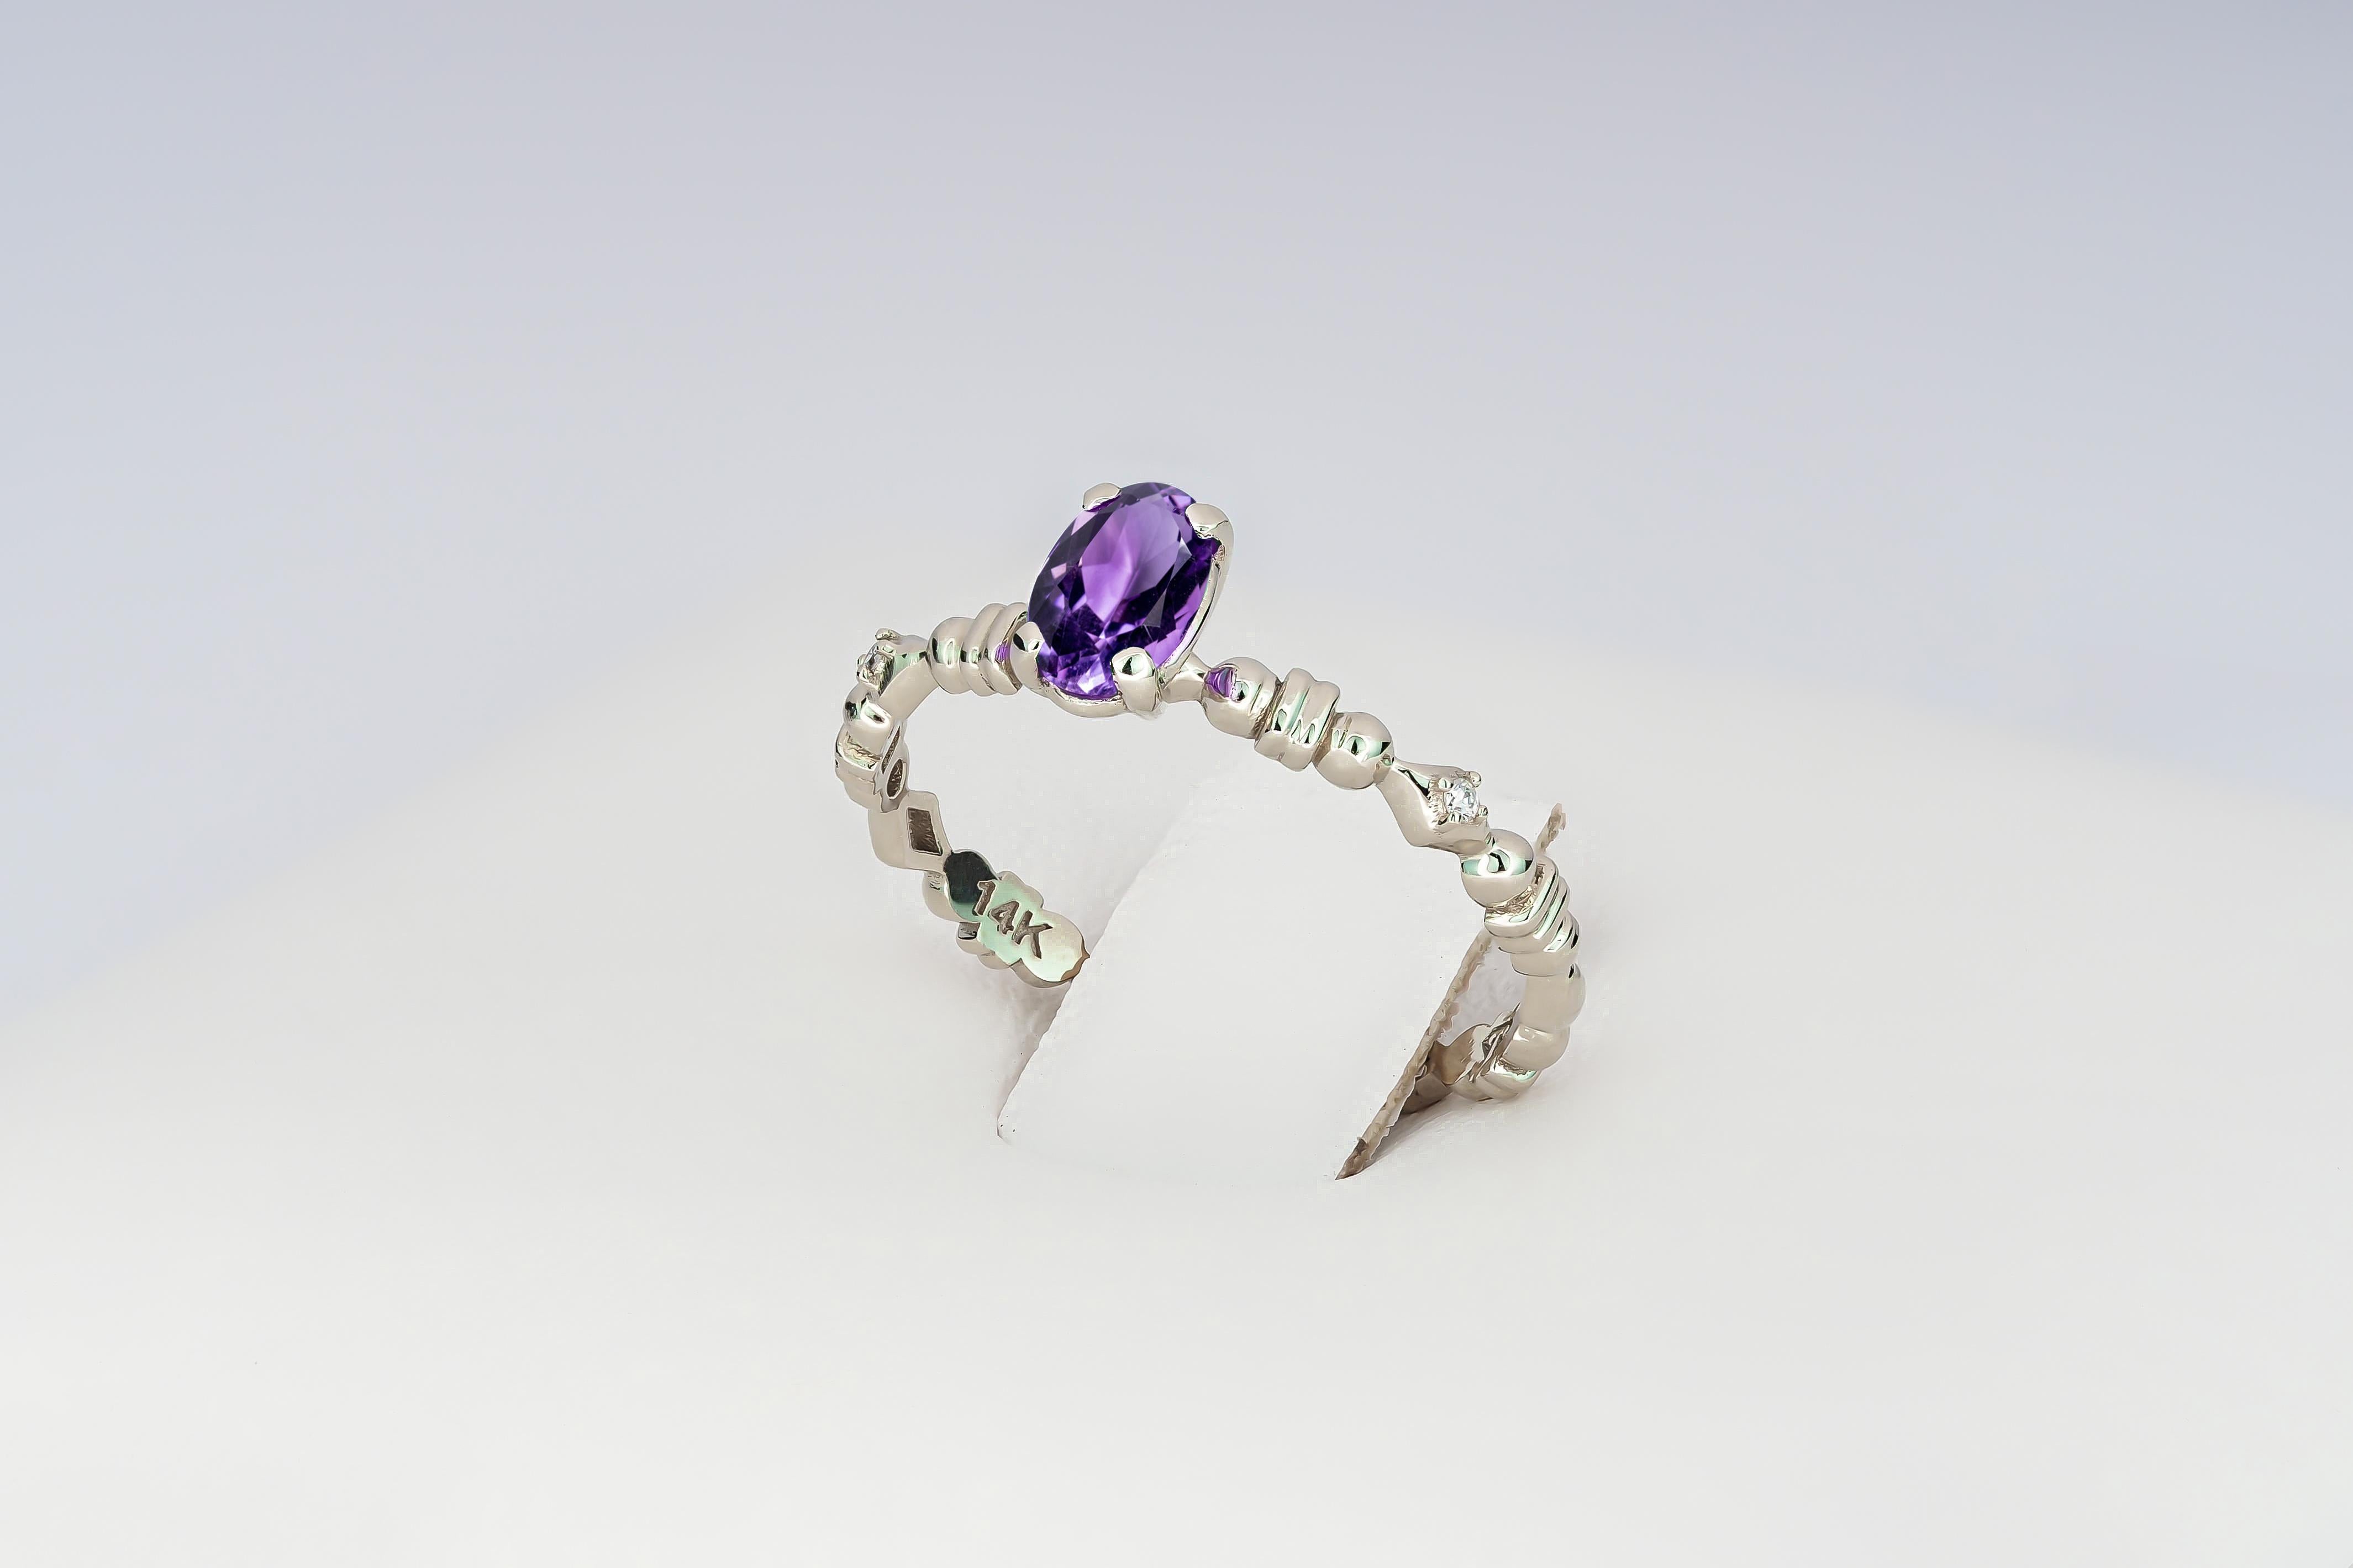 For Sale:  Amethyst Engagement Ring, Oval Amethyst Ring, 14k Gold Ring with Amethyst 5